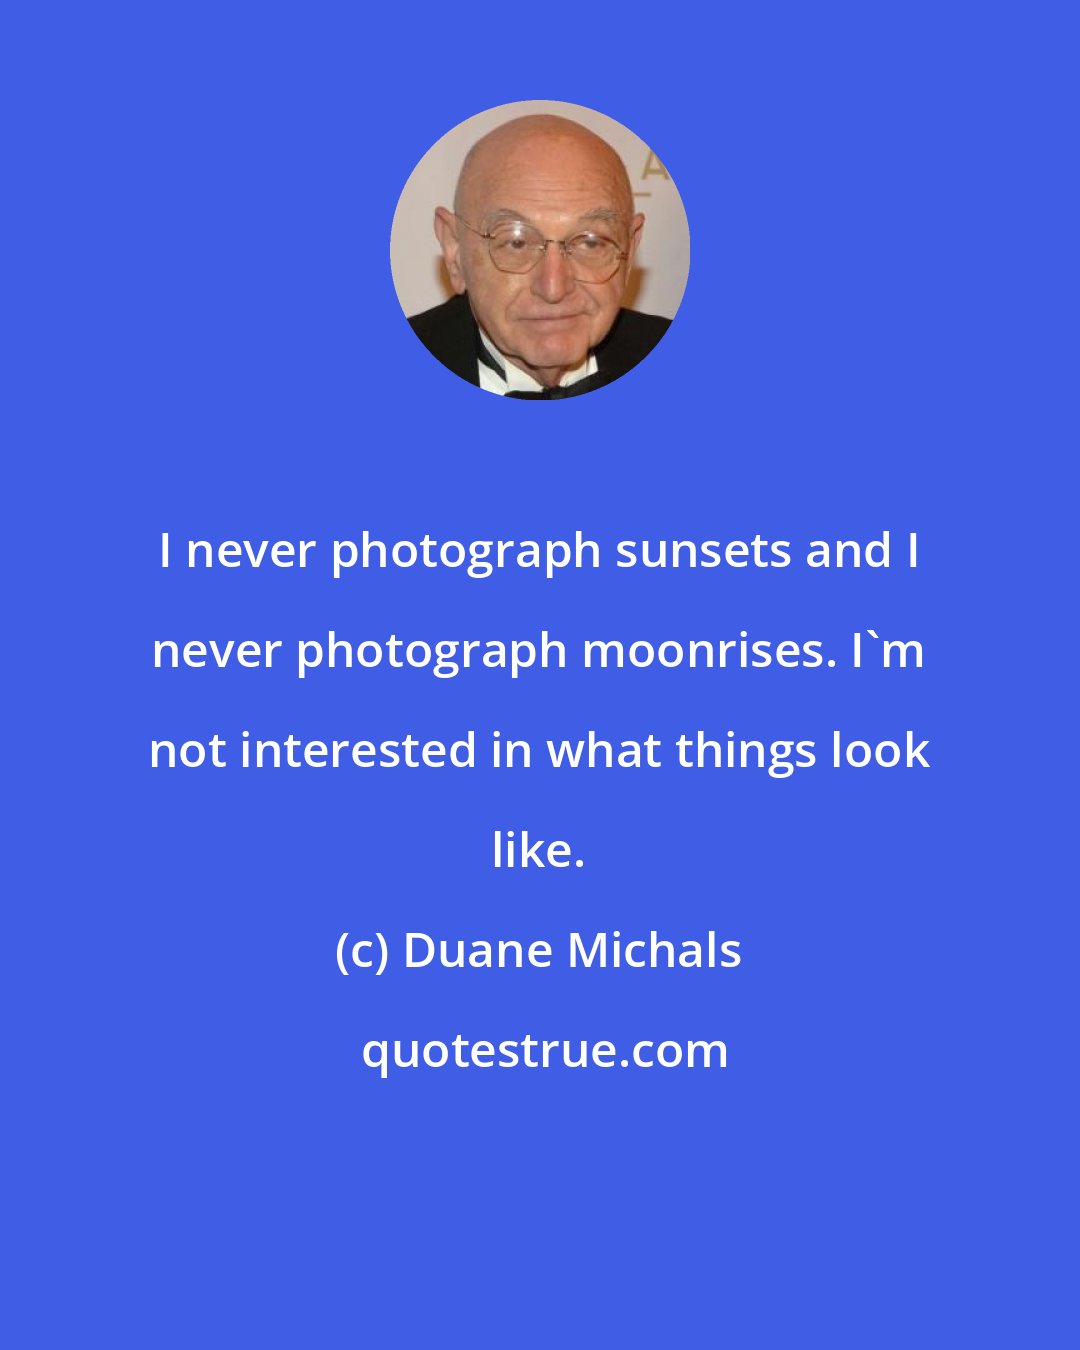 Duane Michals: I never photograph sunsets and I never photograph moonrises. I'm not interested in what things look like.